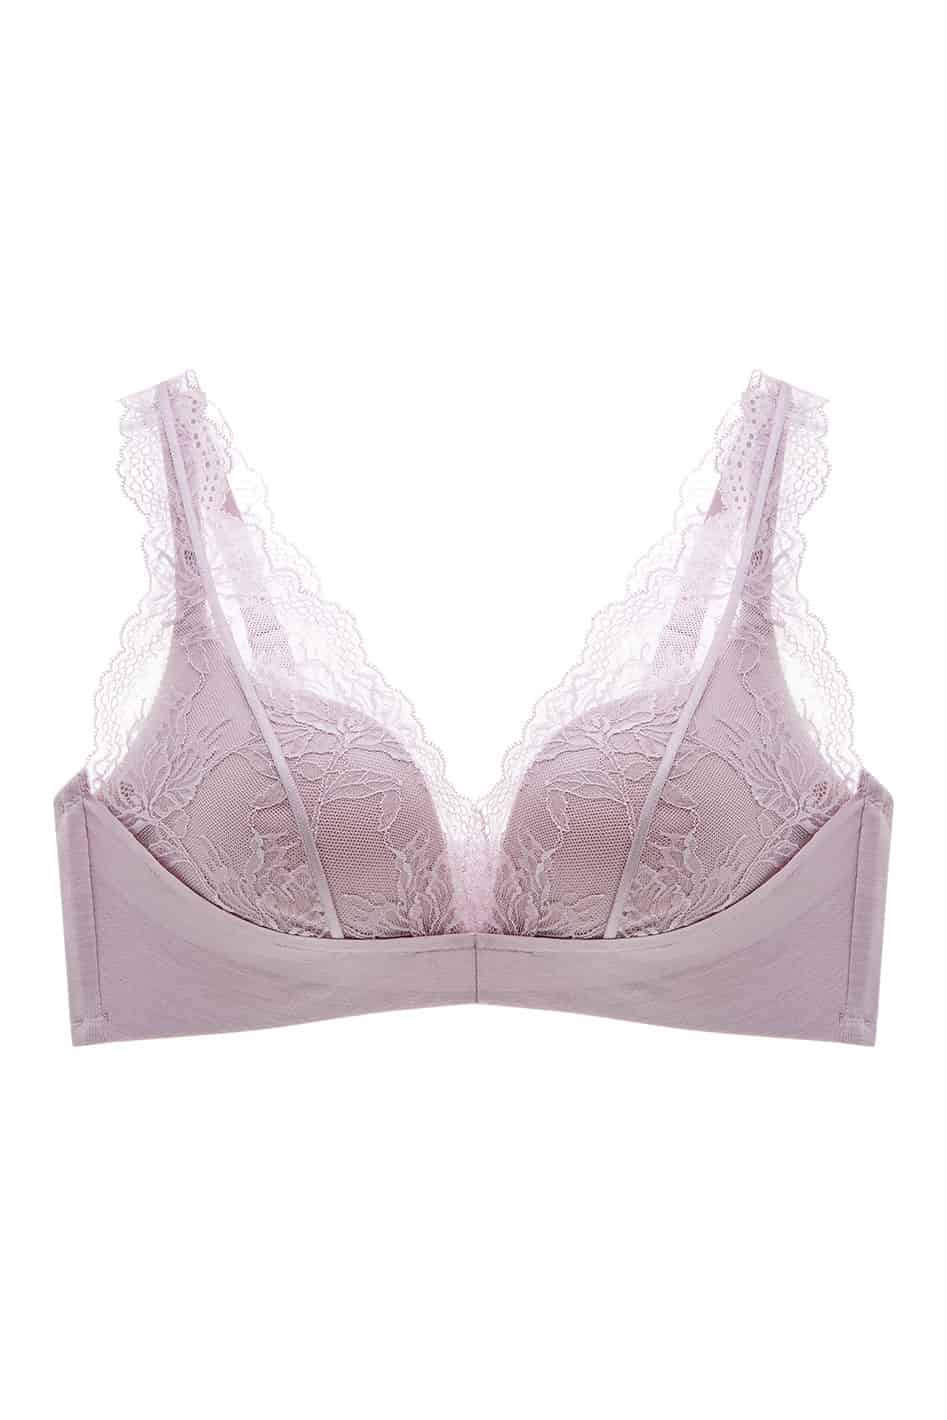 TOWED22 Womens Wireless Bra,Women's Push Up Bras Lace Padded Floral Contour  Underwire Lightly Lined Plunge Bra Pink,42/95C 